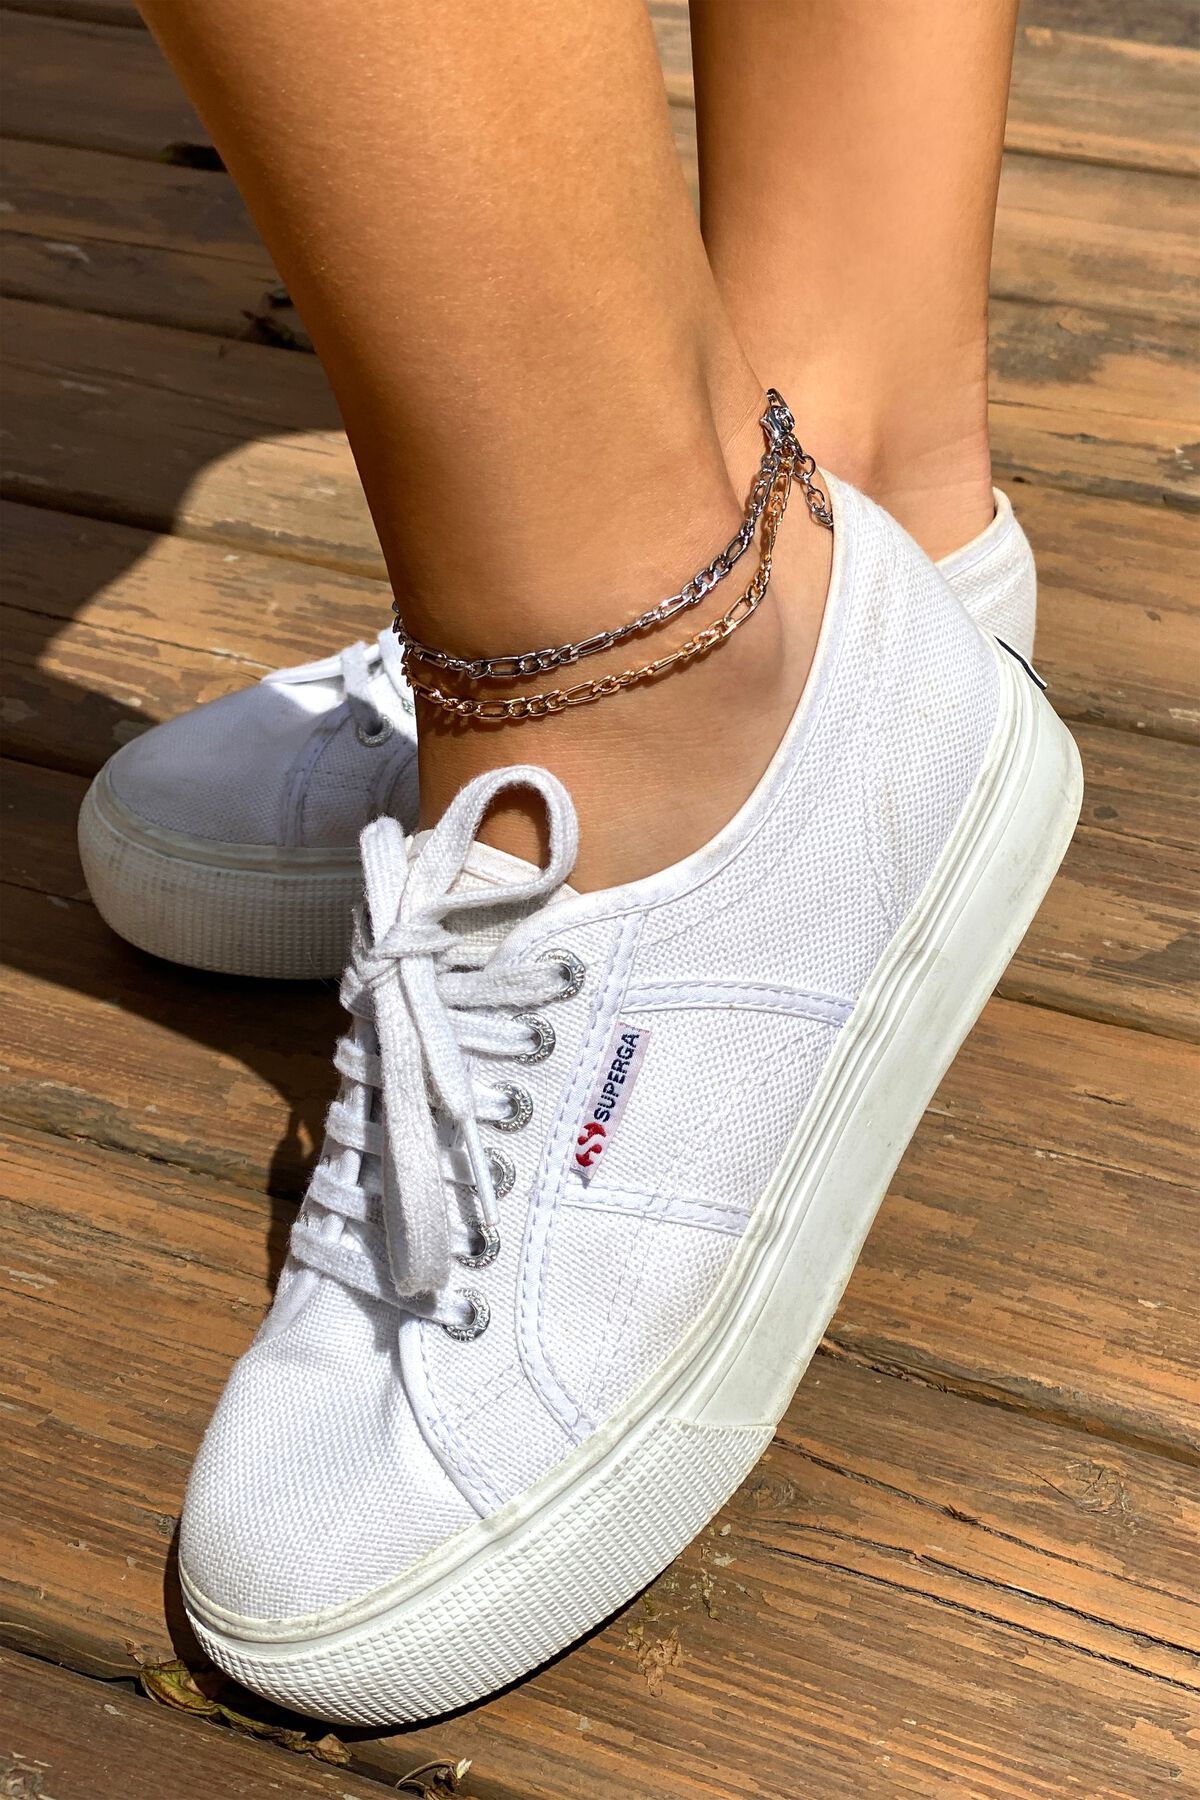 Dynamite 2 Pack Figaro Chain Anklet. 1